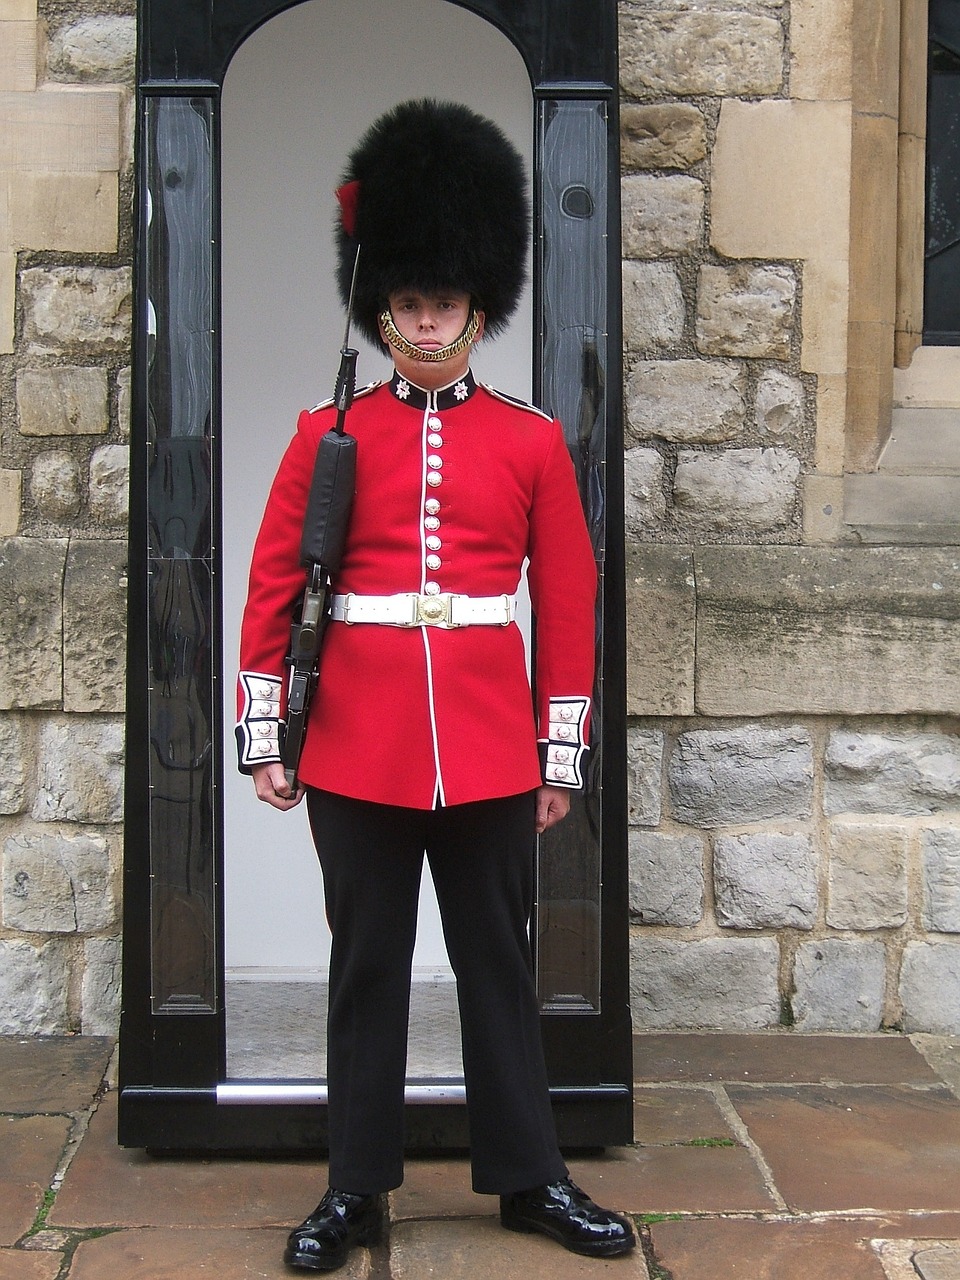 coldstream guard tower of london historical free photo